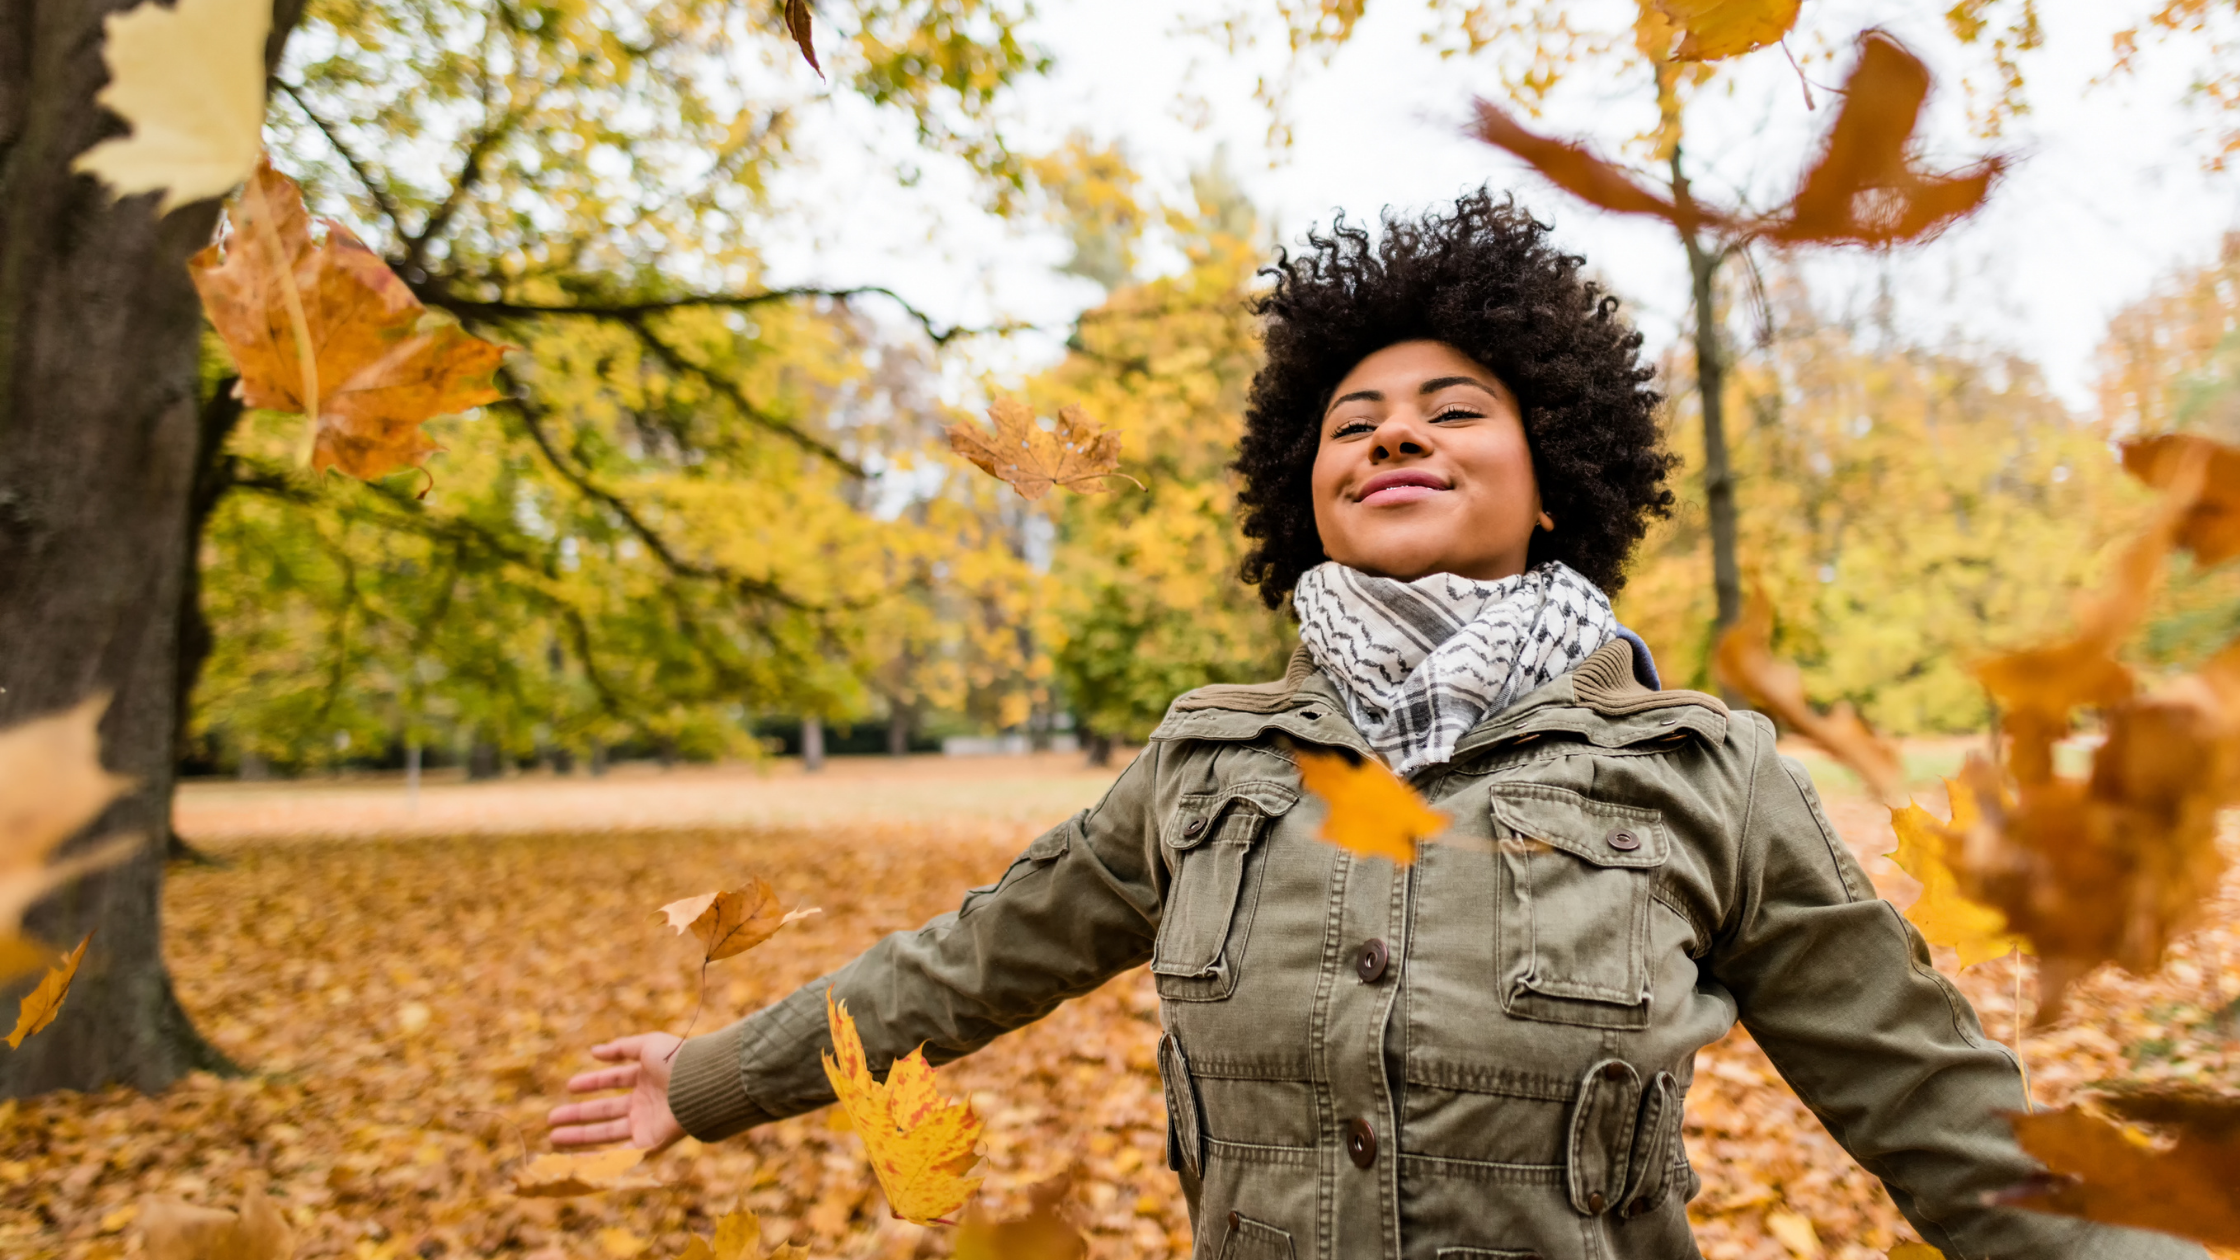 Seasonal Changes Impact Our Skin: A Call for Sunscreen in the Fall